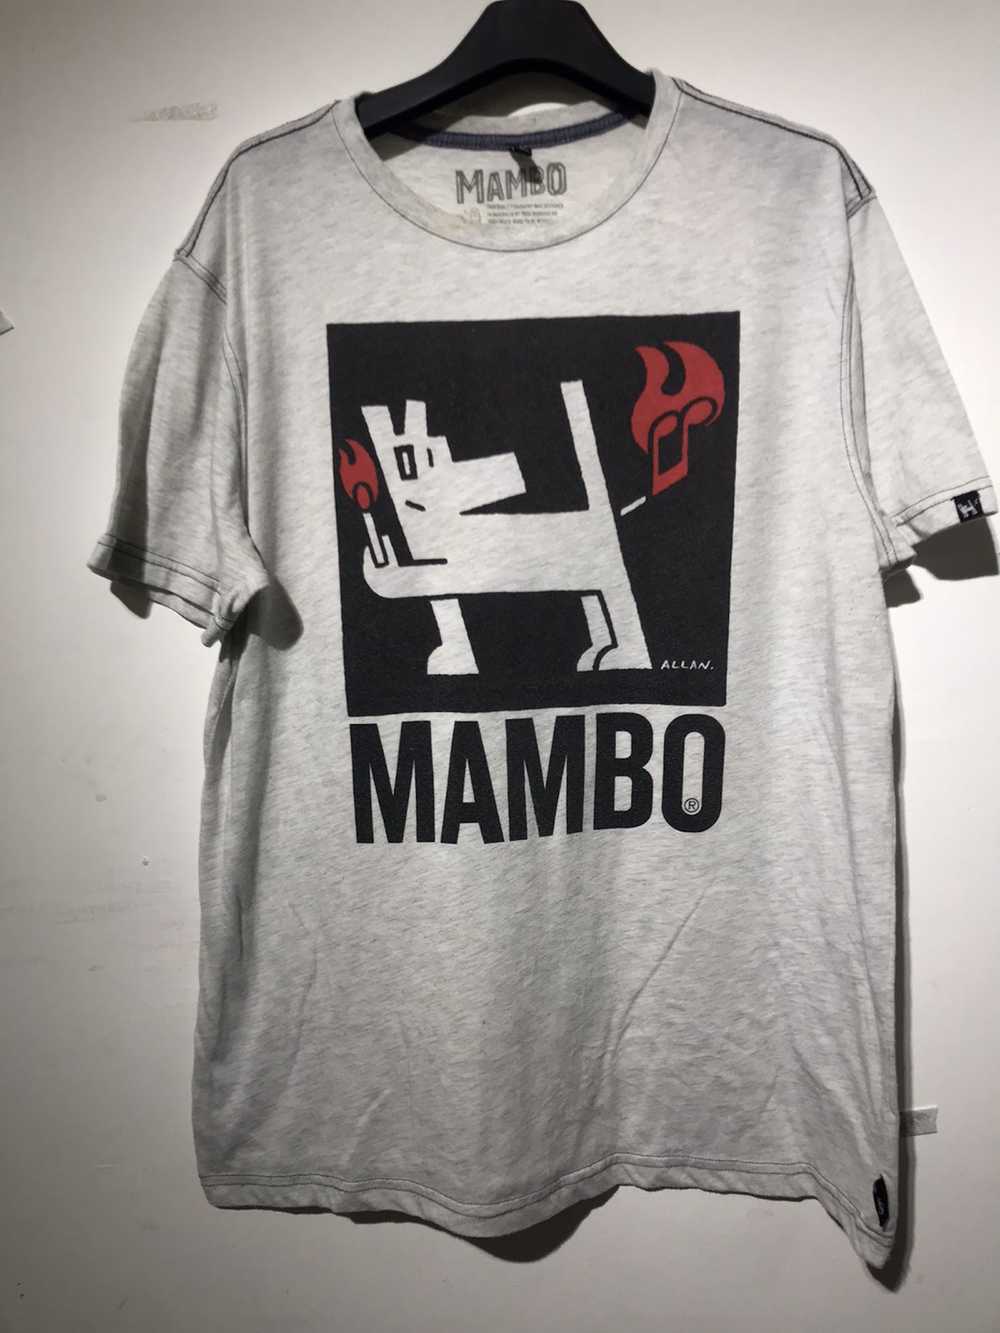 Mambo × Other × Streetwear Vintage 90s Mambo T-Sh… - image 1